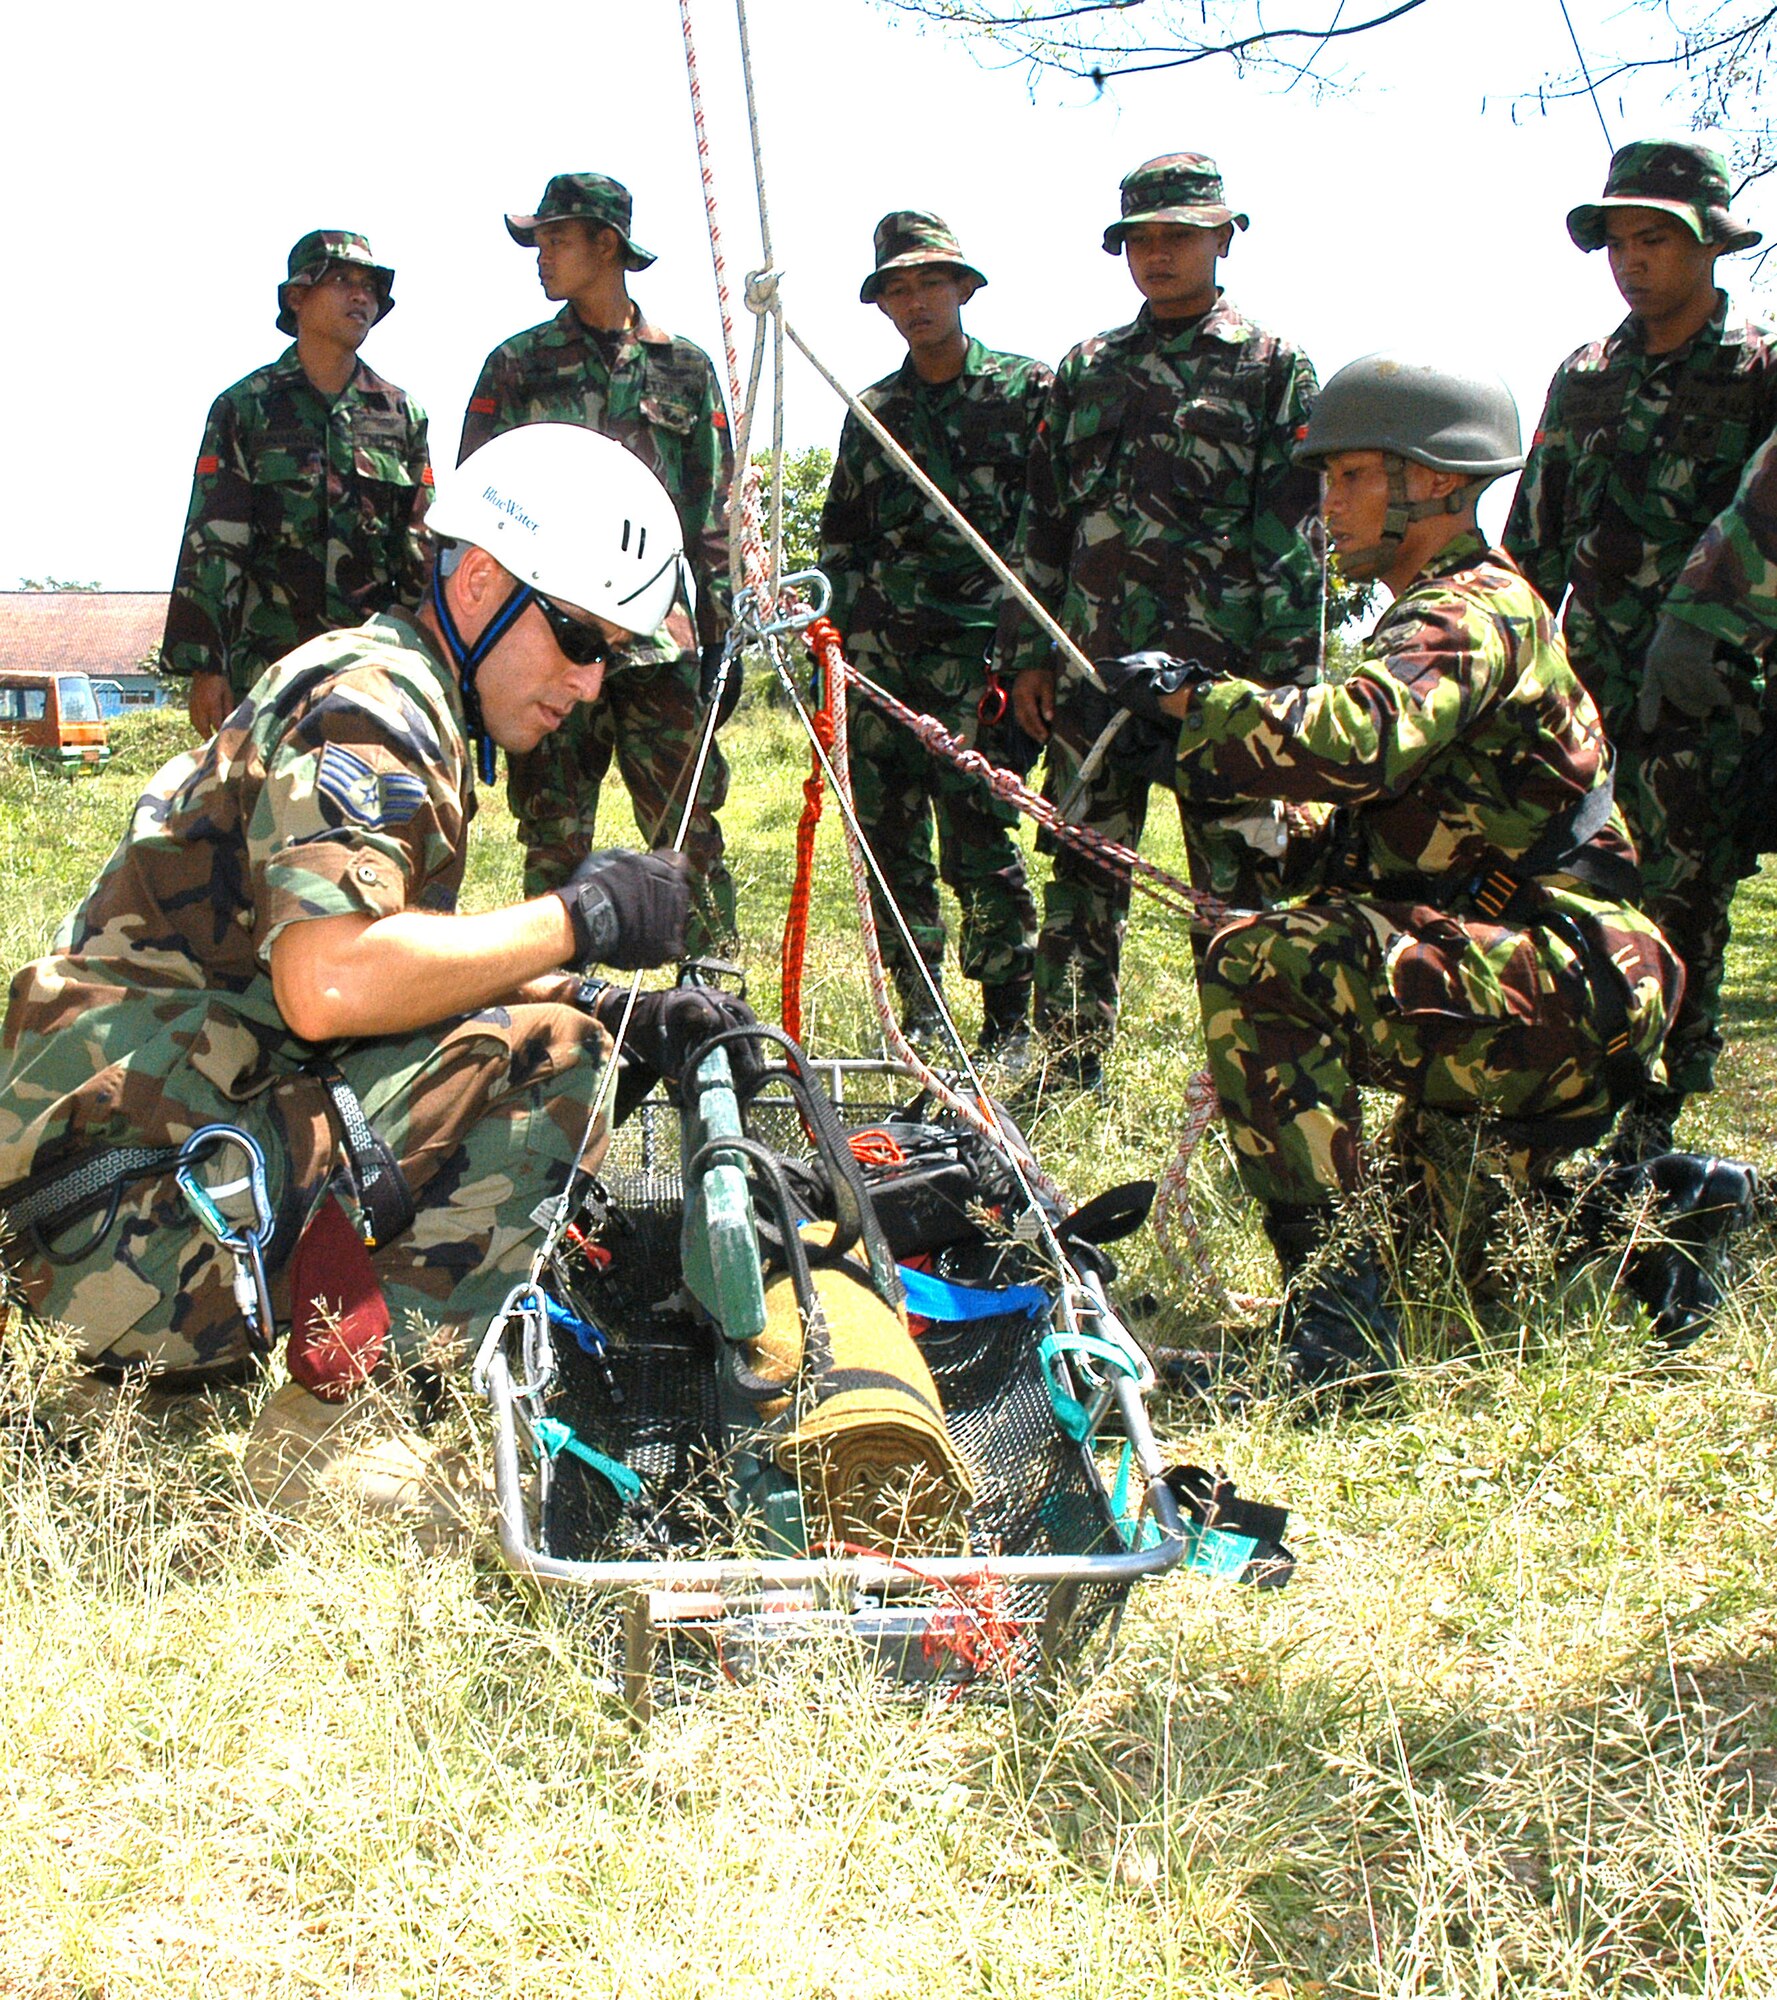 A pararescueman from the 320th Special Tactics Squadron, based at Kadena AB, Jaopan, helps members of the Indonesian Pashkas prepare a volunteer for a high angle rescue, one of the demonstrations during a recent training exercise between the 353rd Special Operations Group, and the Indonesian Air Force, during Exercise Teak Iron. (U.S. Air Force photo/Master Sgt. Marilyn C. Holliday)
